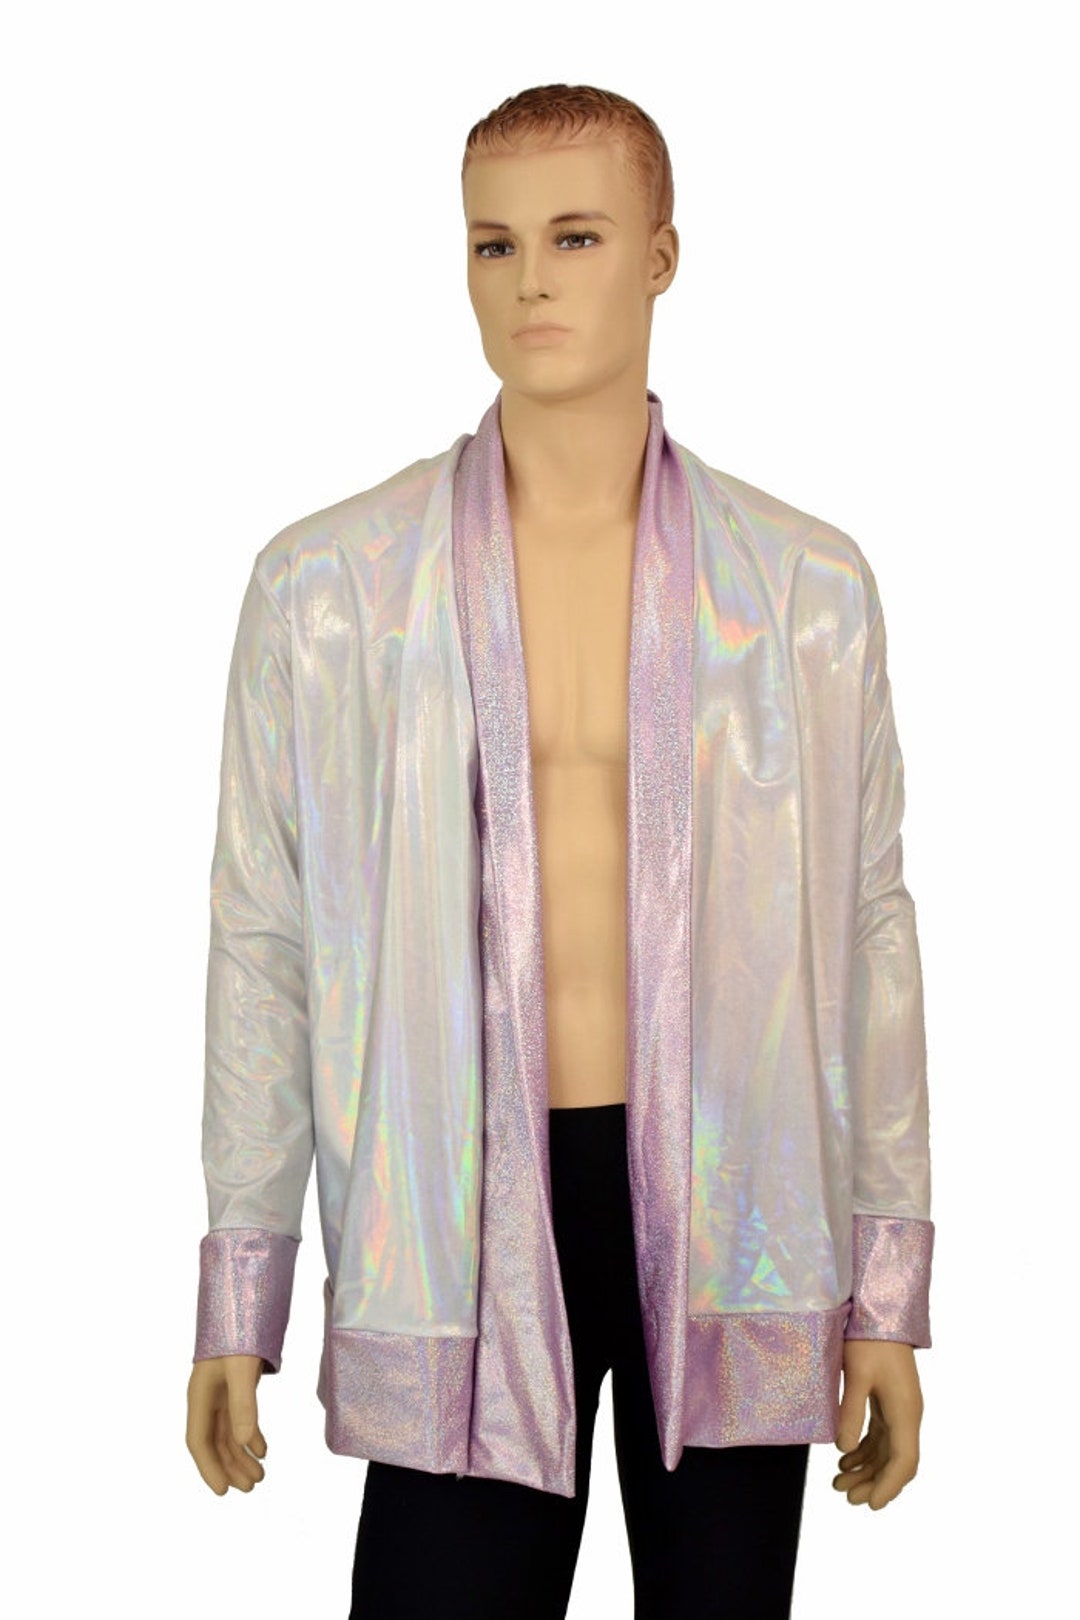 Men's Flashbulb Holographic not a Cardigan - Etsy